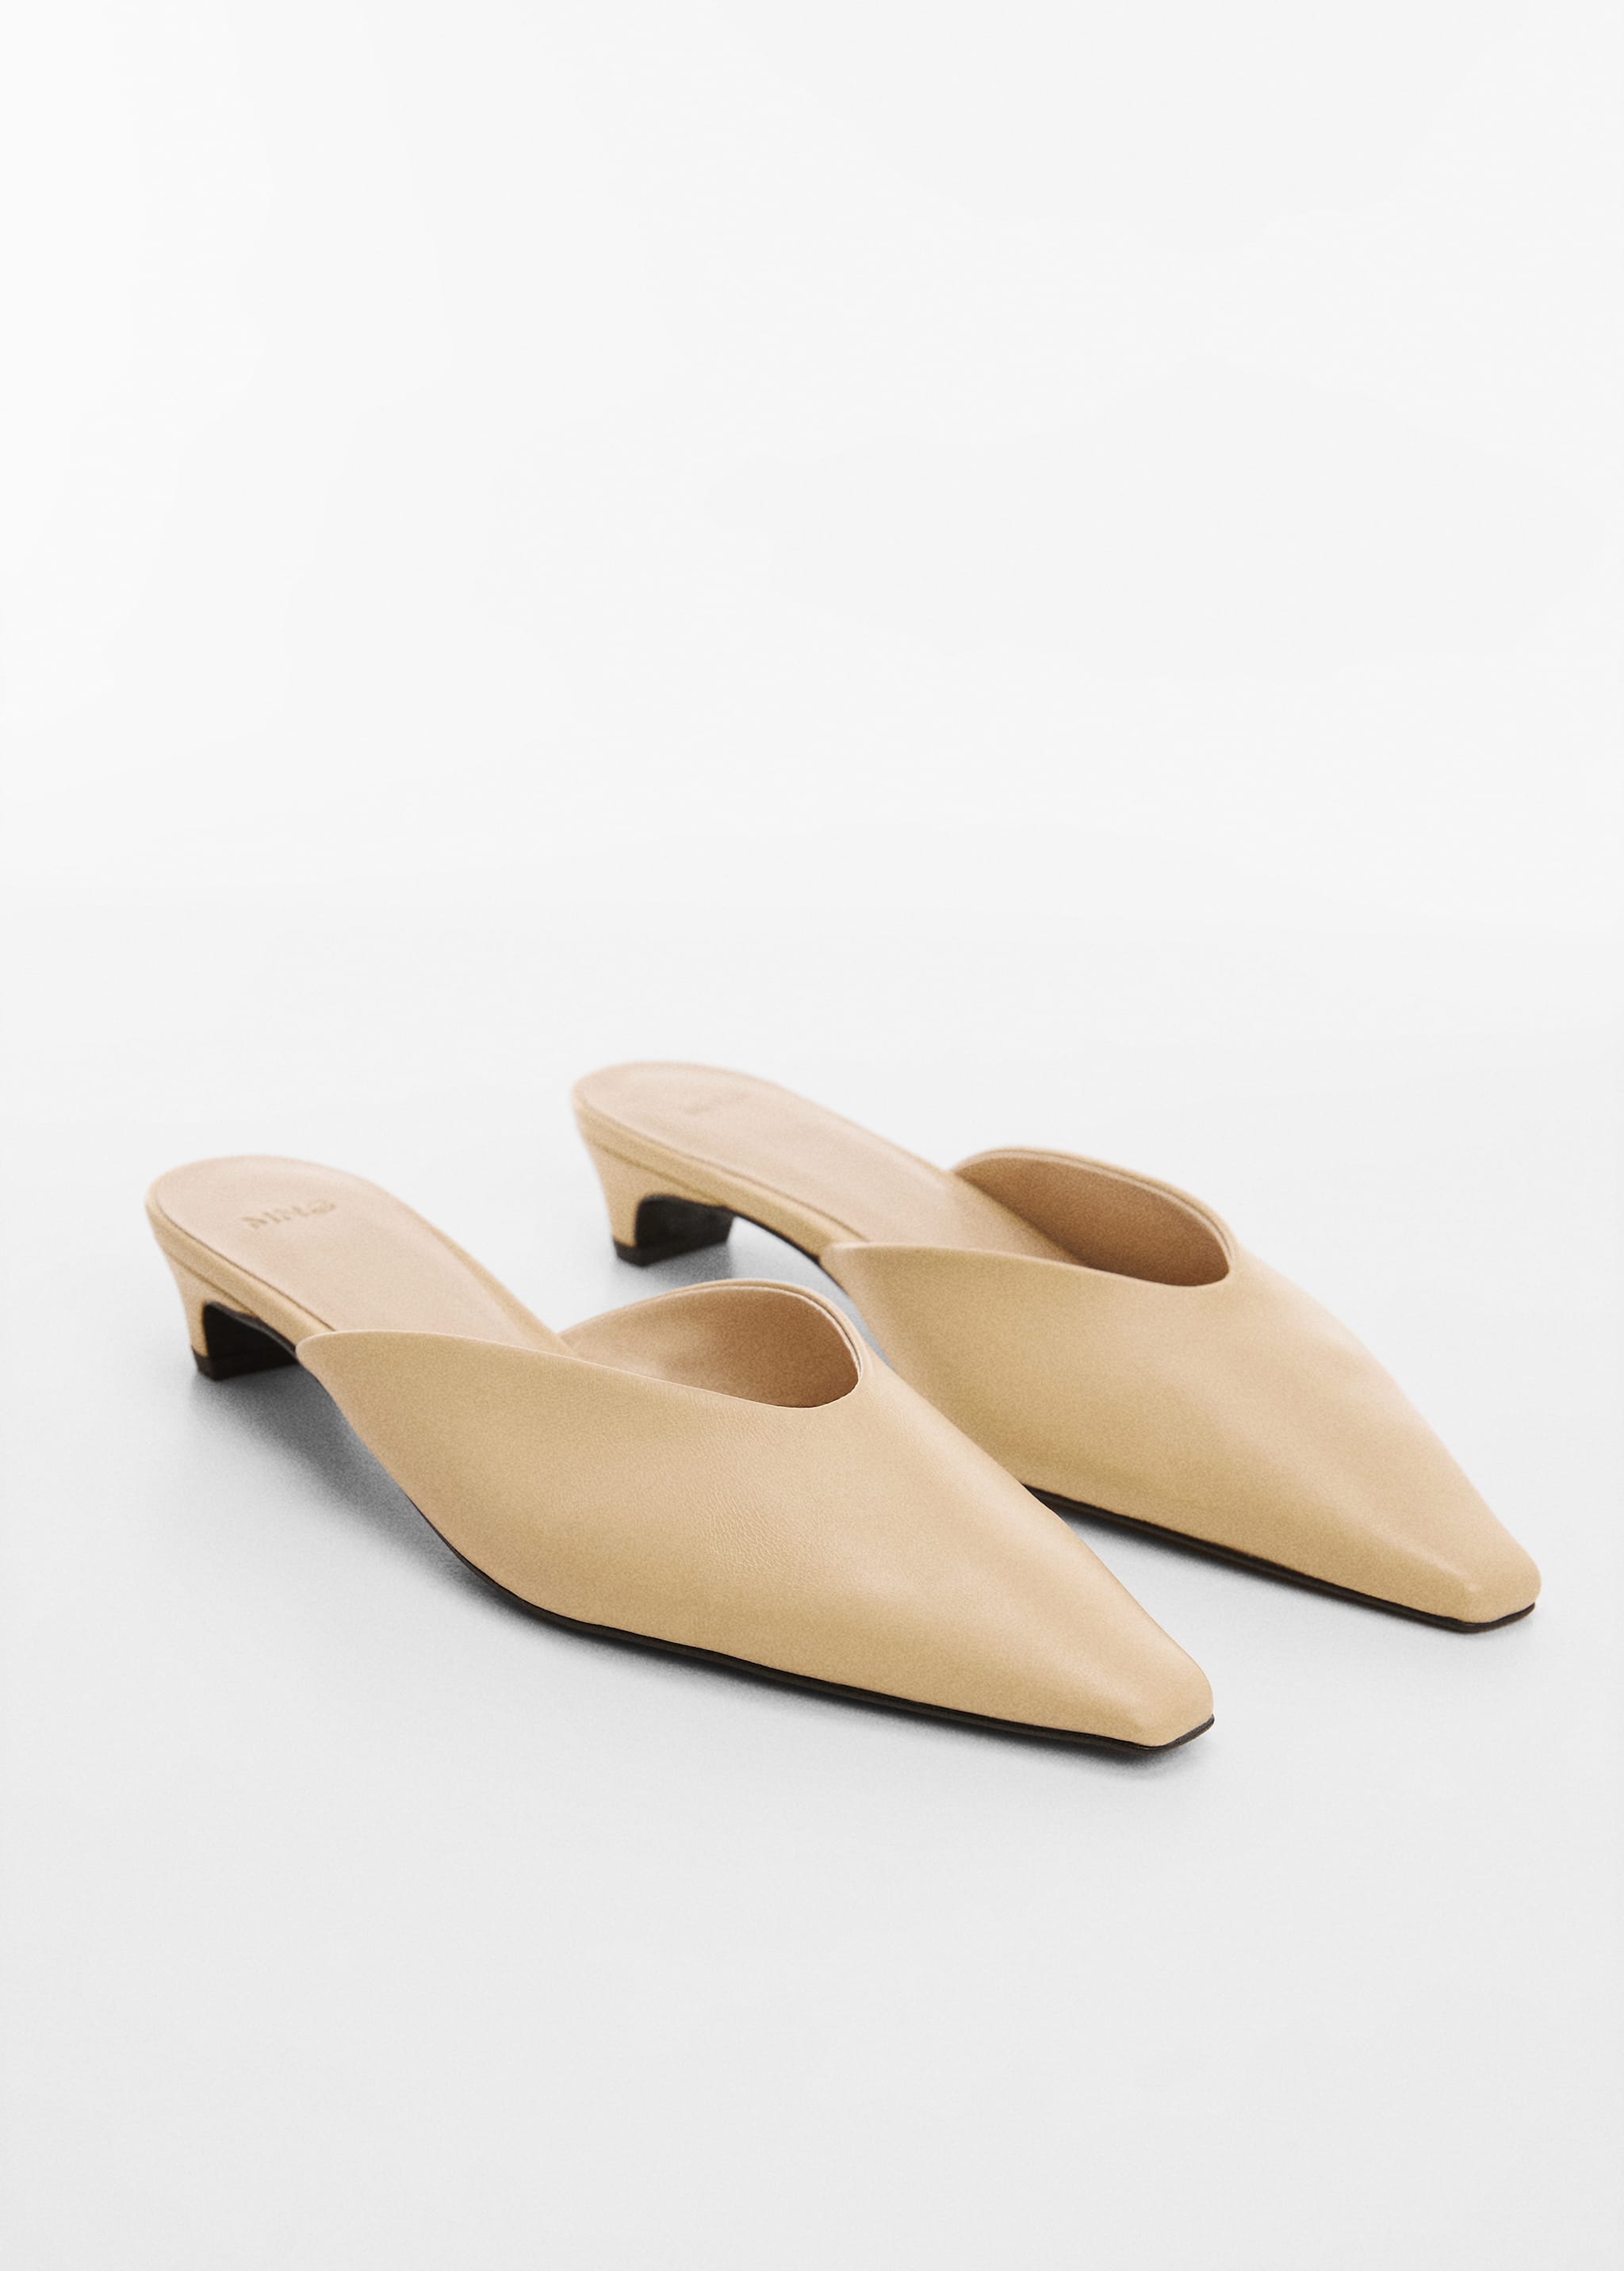 Pointed toe leather shoes - Medium plane